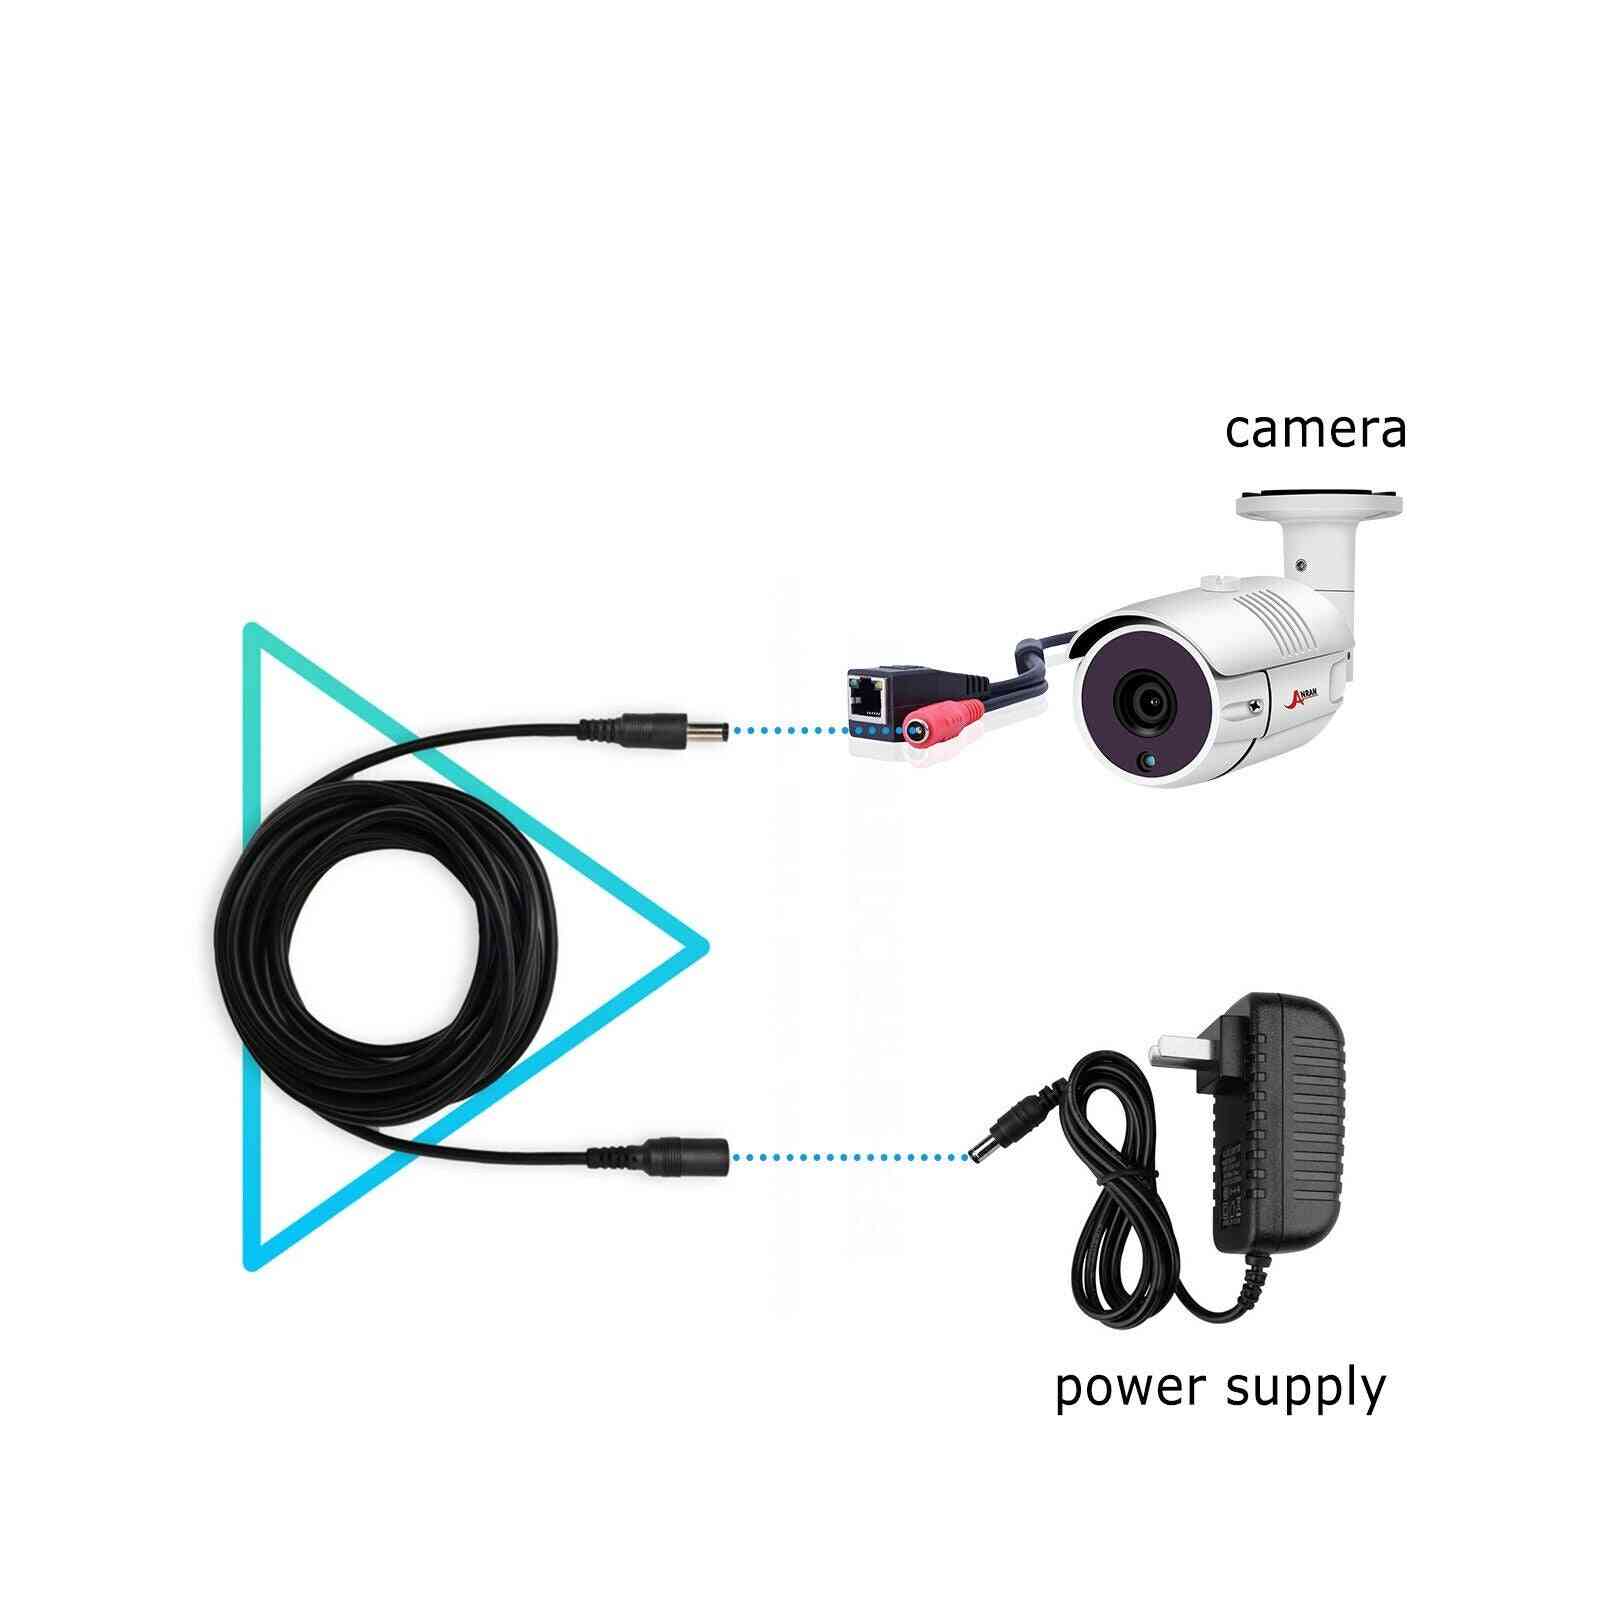 Hd Wireless Power Extension, Security Camera Video, Standard Cable